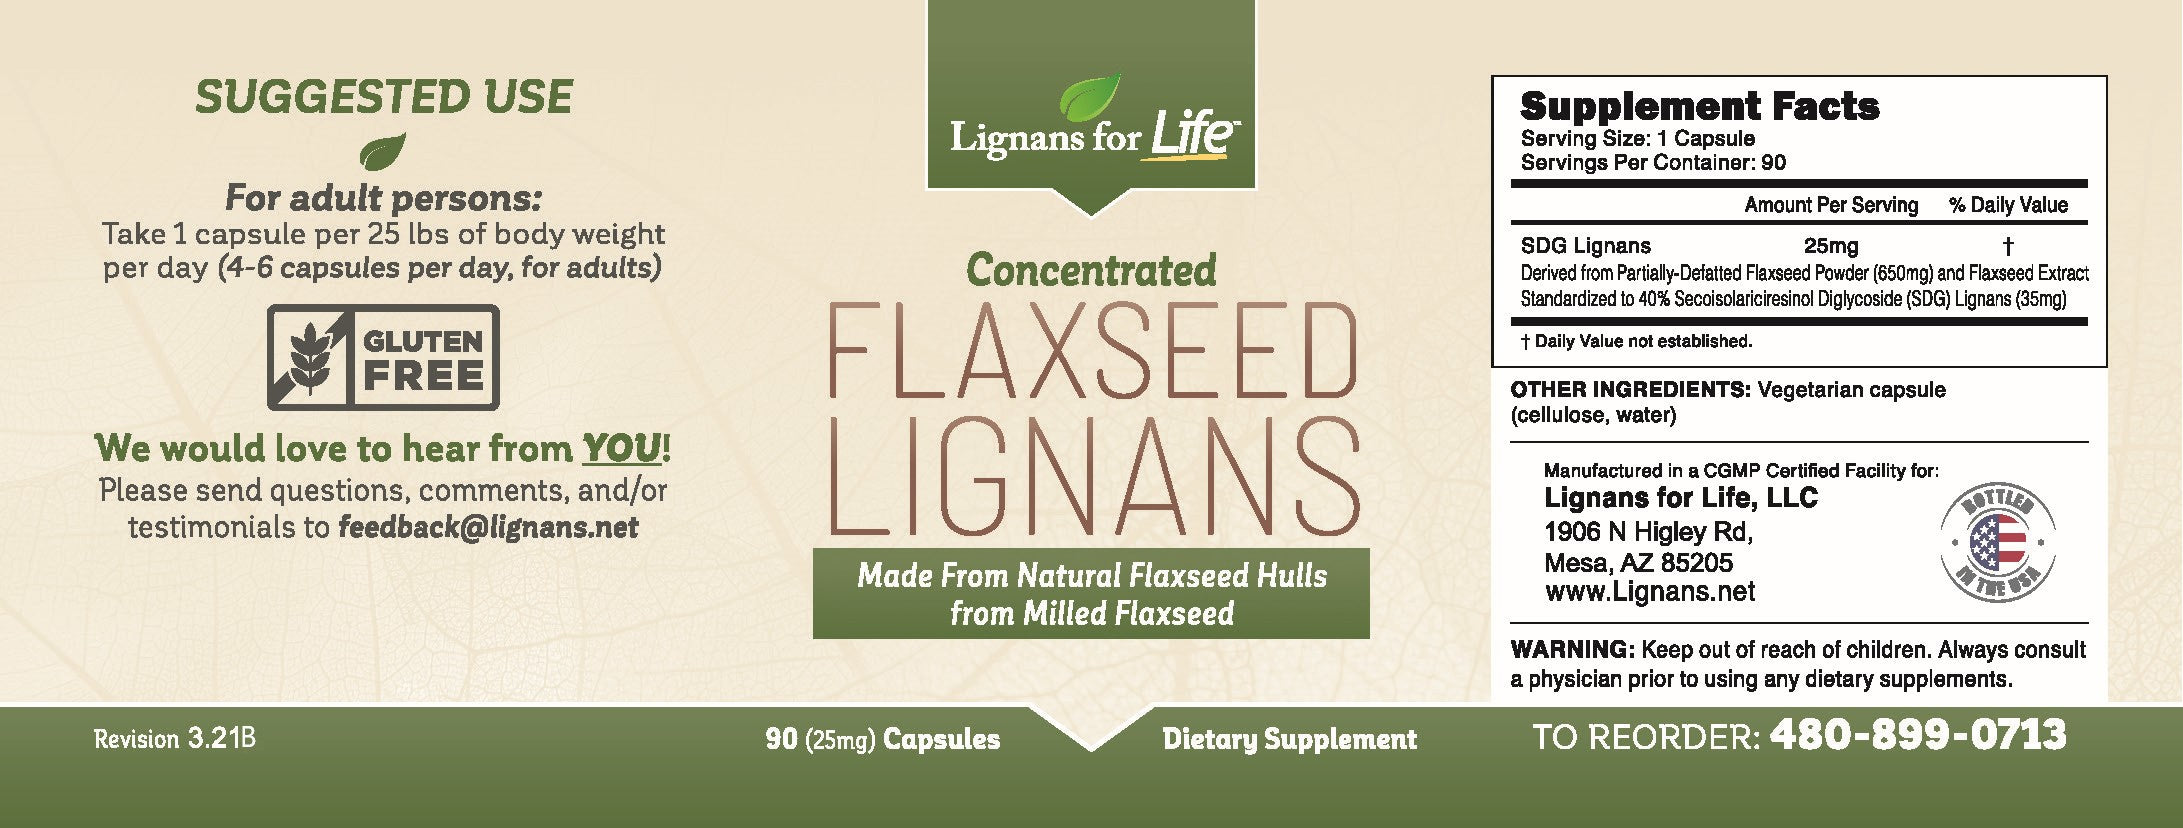 Lignans for Life Flaxseed Lignans 25mg Label